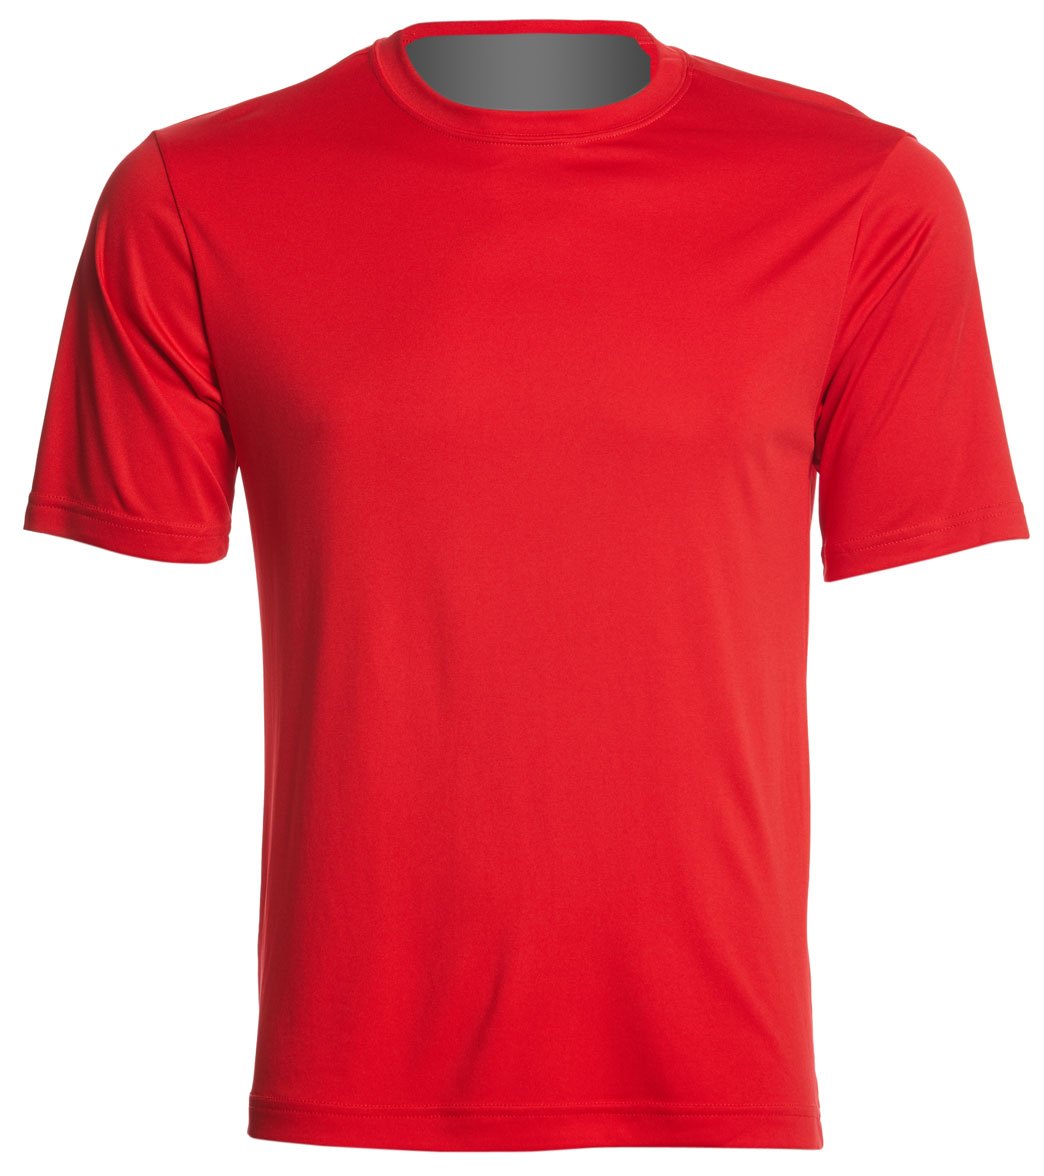 Men's Posicharge Competitortm Tee Shirt - True Red Large Polyester - Swimoutlet.com